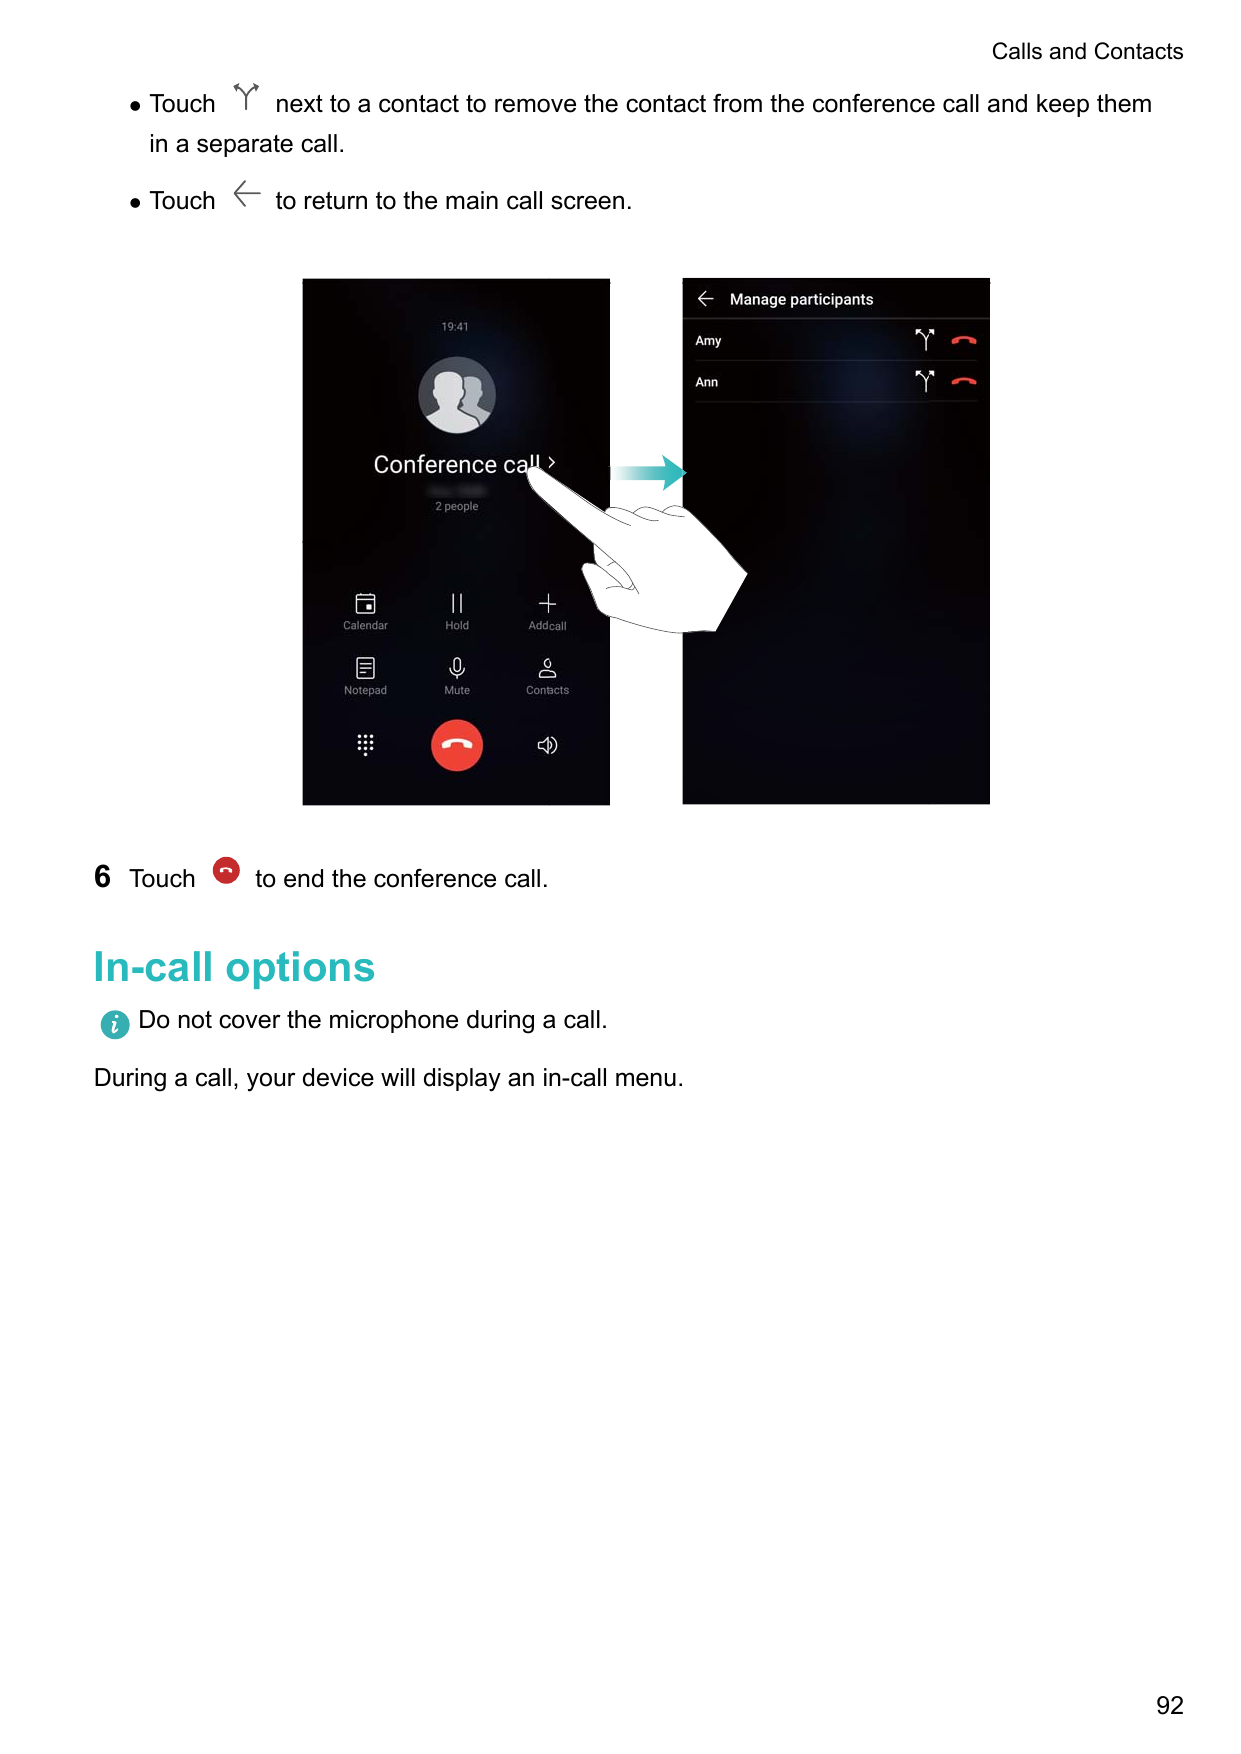 Calls and ContactslTouchnext to a contact to remove the contact from the conference call and keep themin a separate call.l6Touch